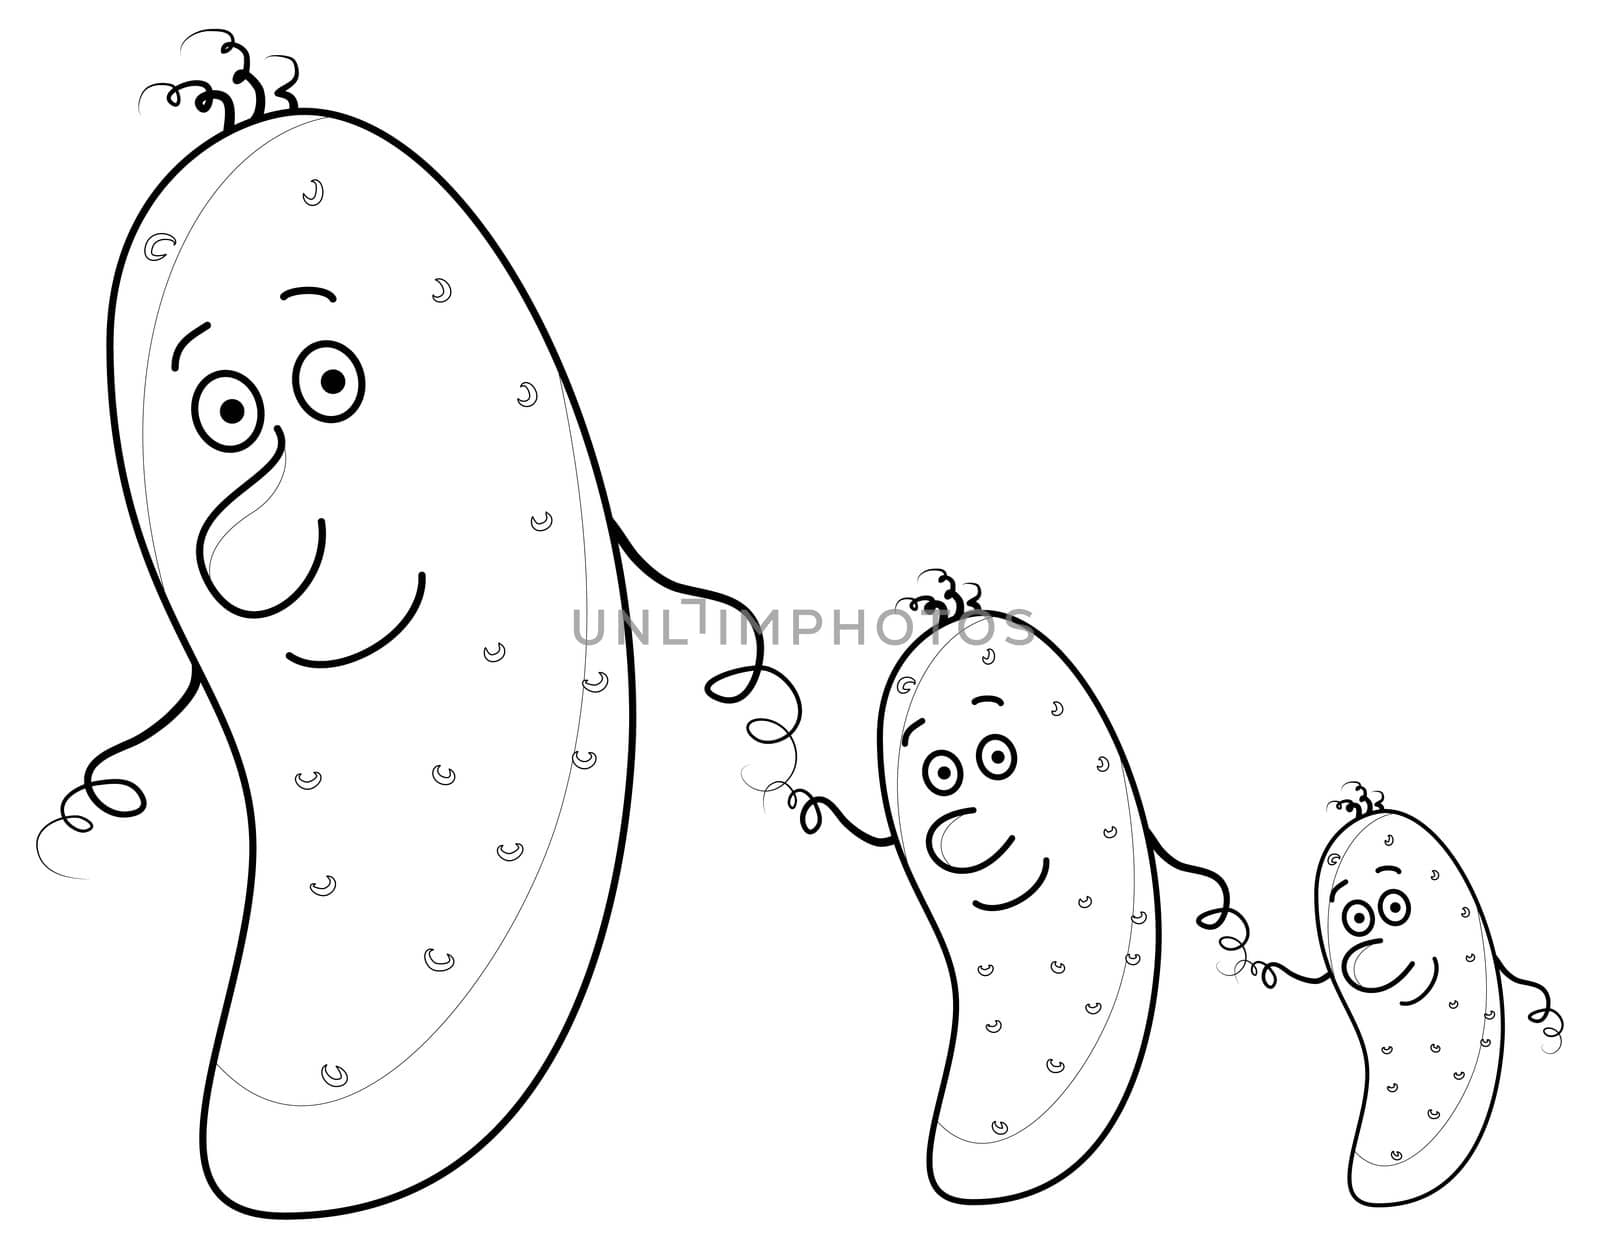 Family of cucumbers, ,parent and two children, contour